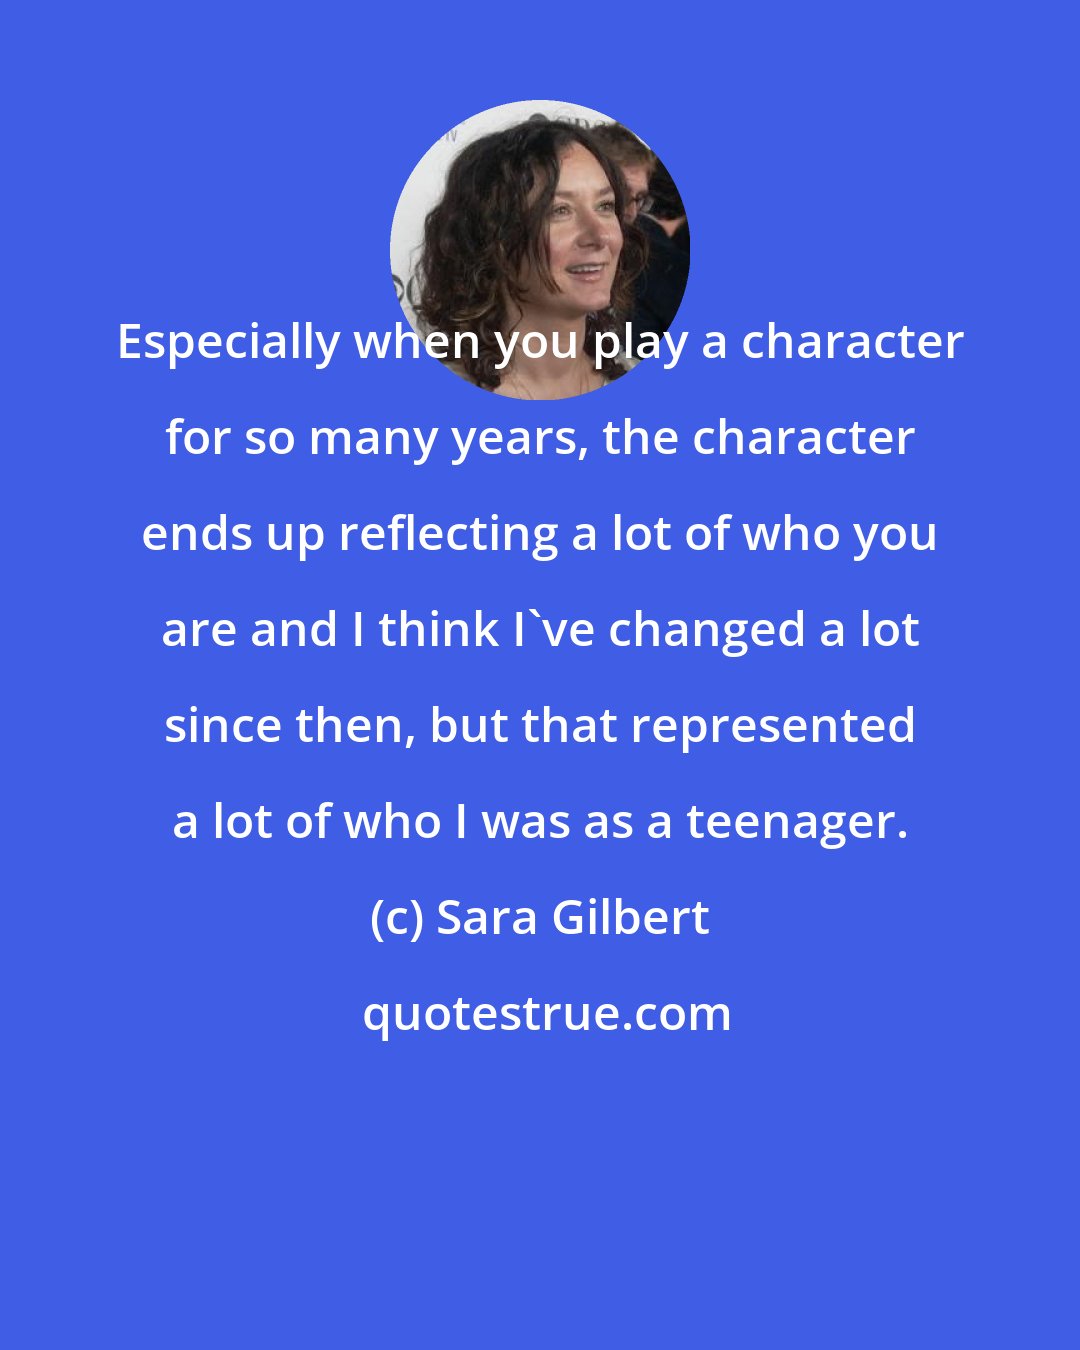 Sara Gilbert: Especially when you play a character for so many years, the character ends up reflecting a lot of who you are and I think I've changed a lot since then, but that represented a lot of who I was as a teenager.